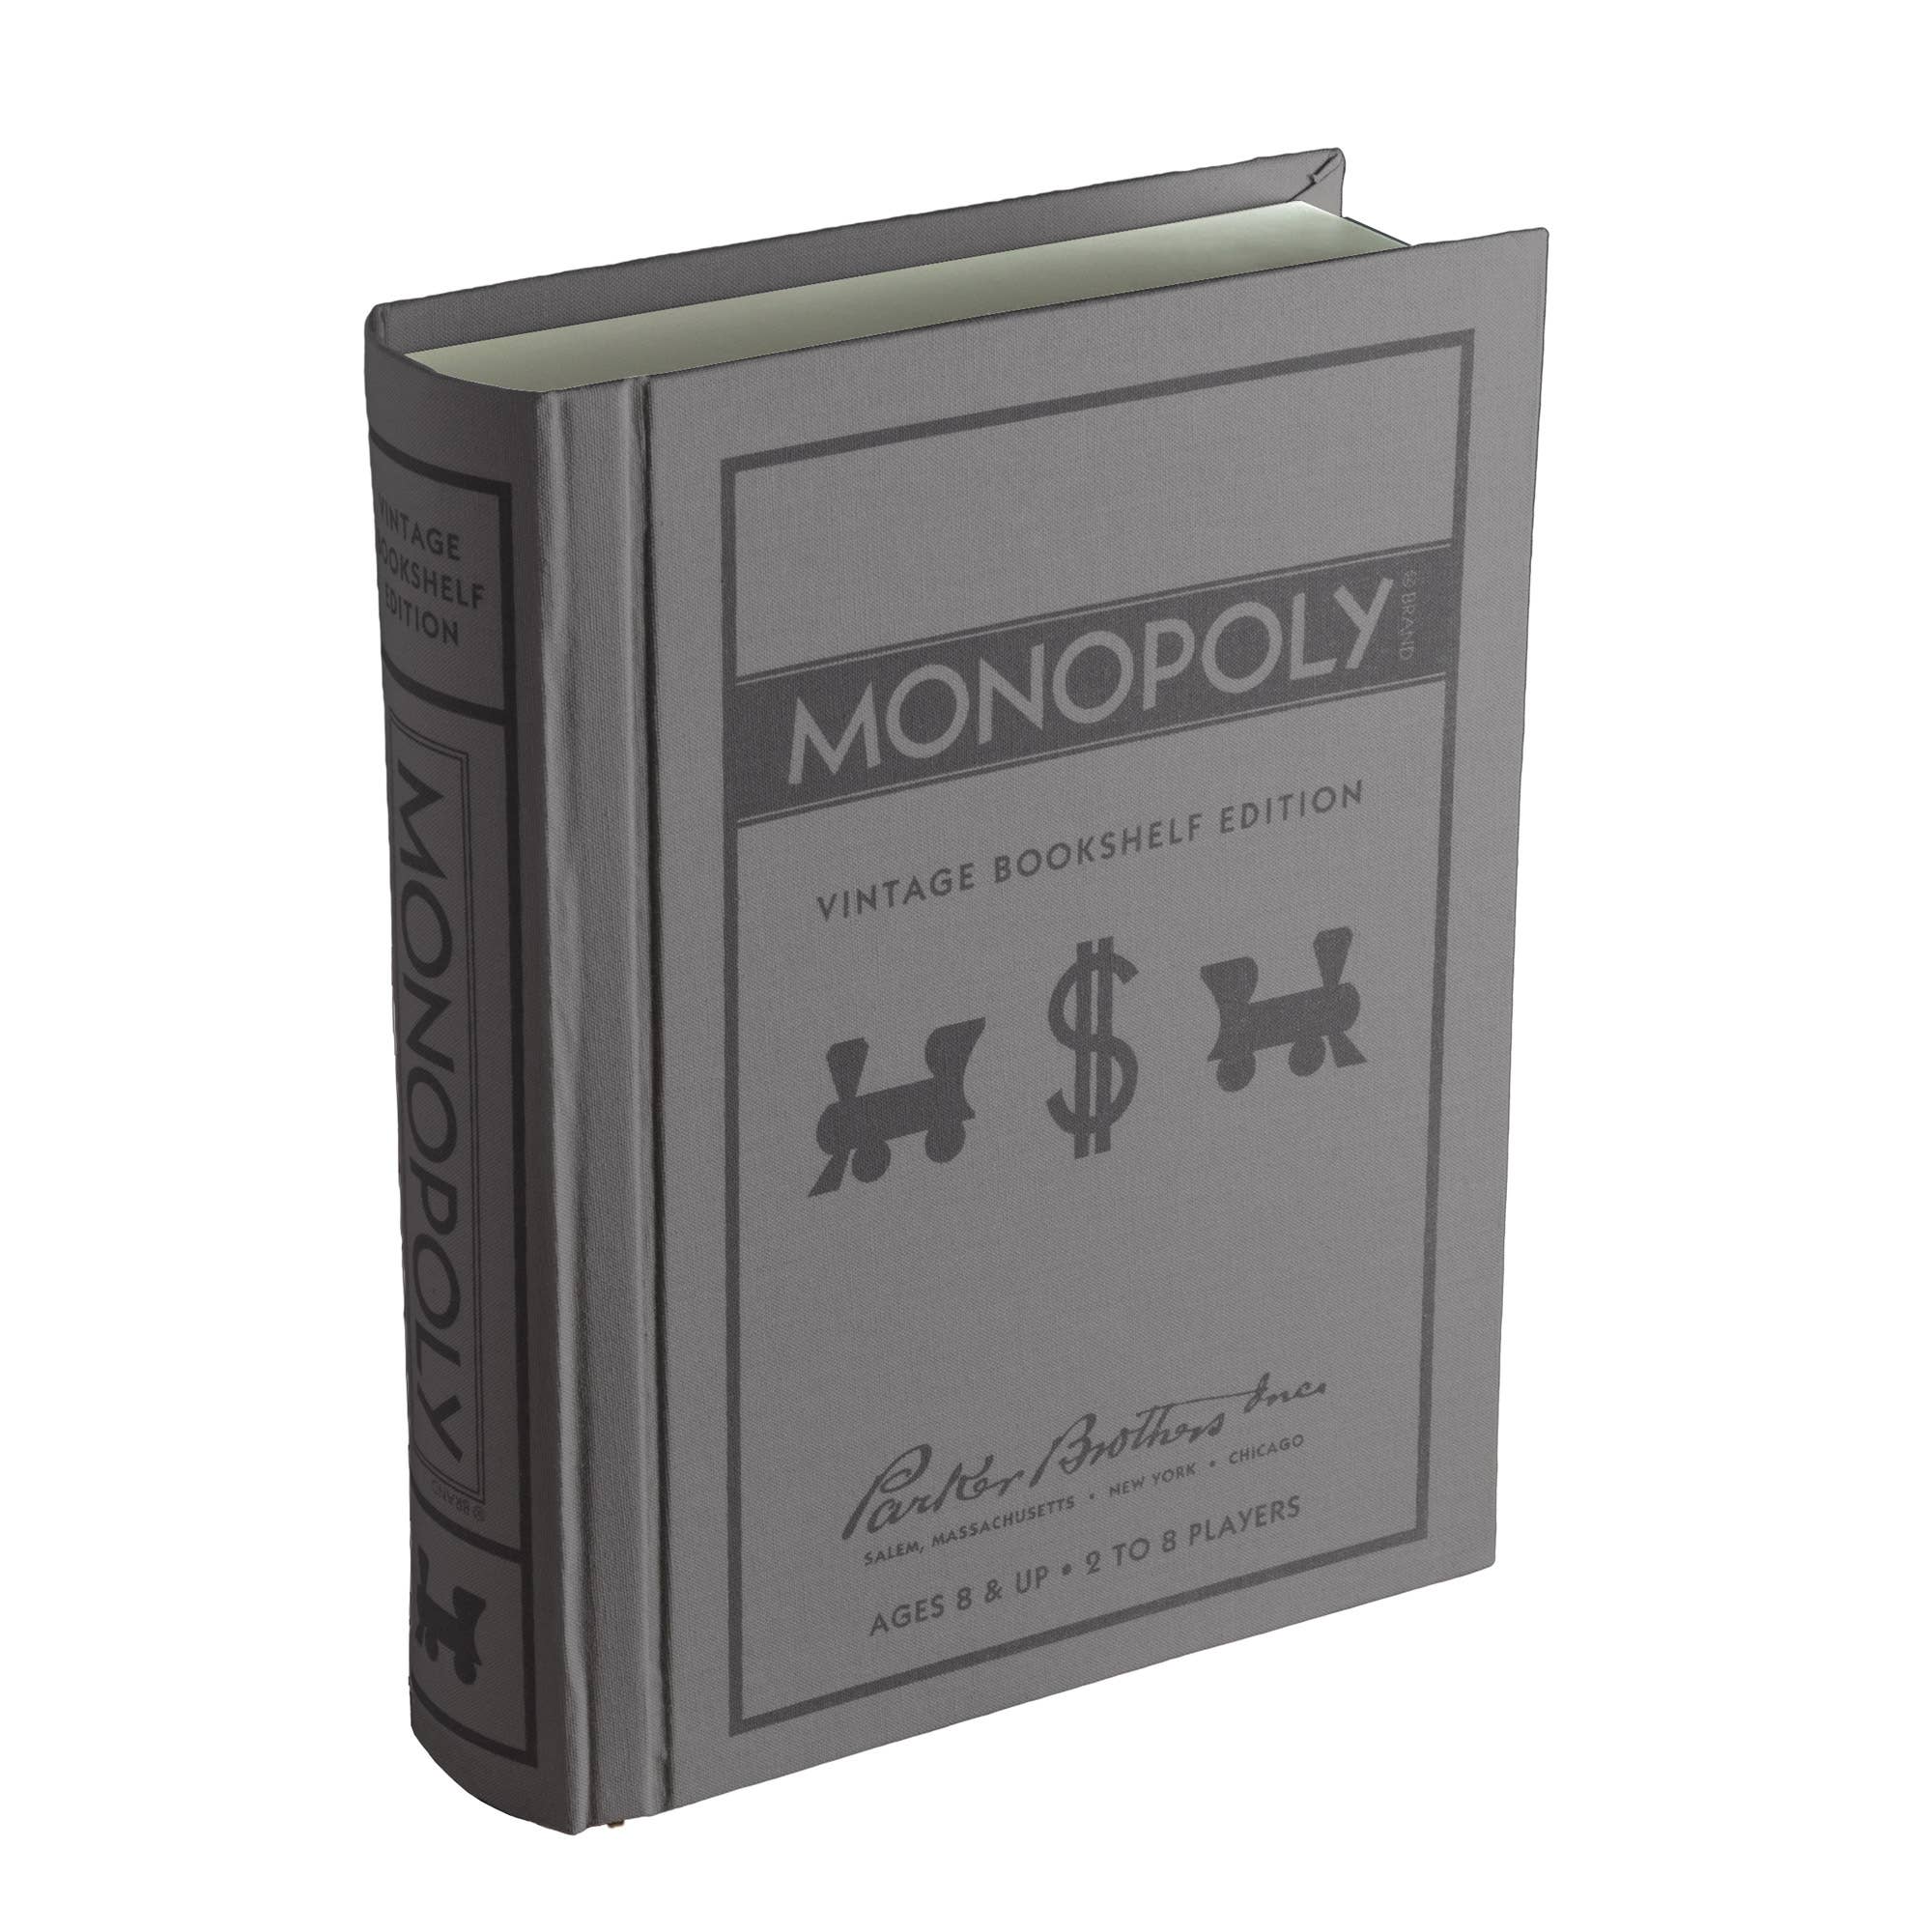 WS Game Company - WS Game Company Monopoly Vintage Bookshelf Edition - Bards & Cards